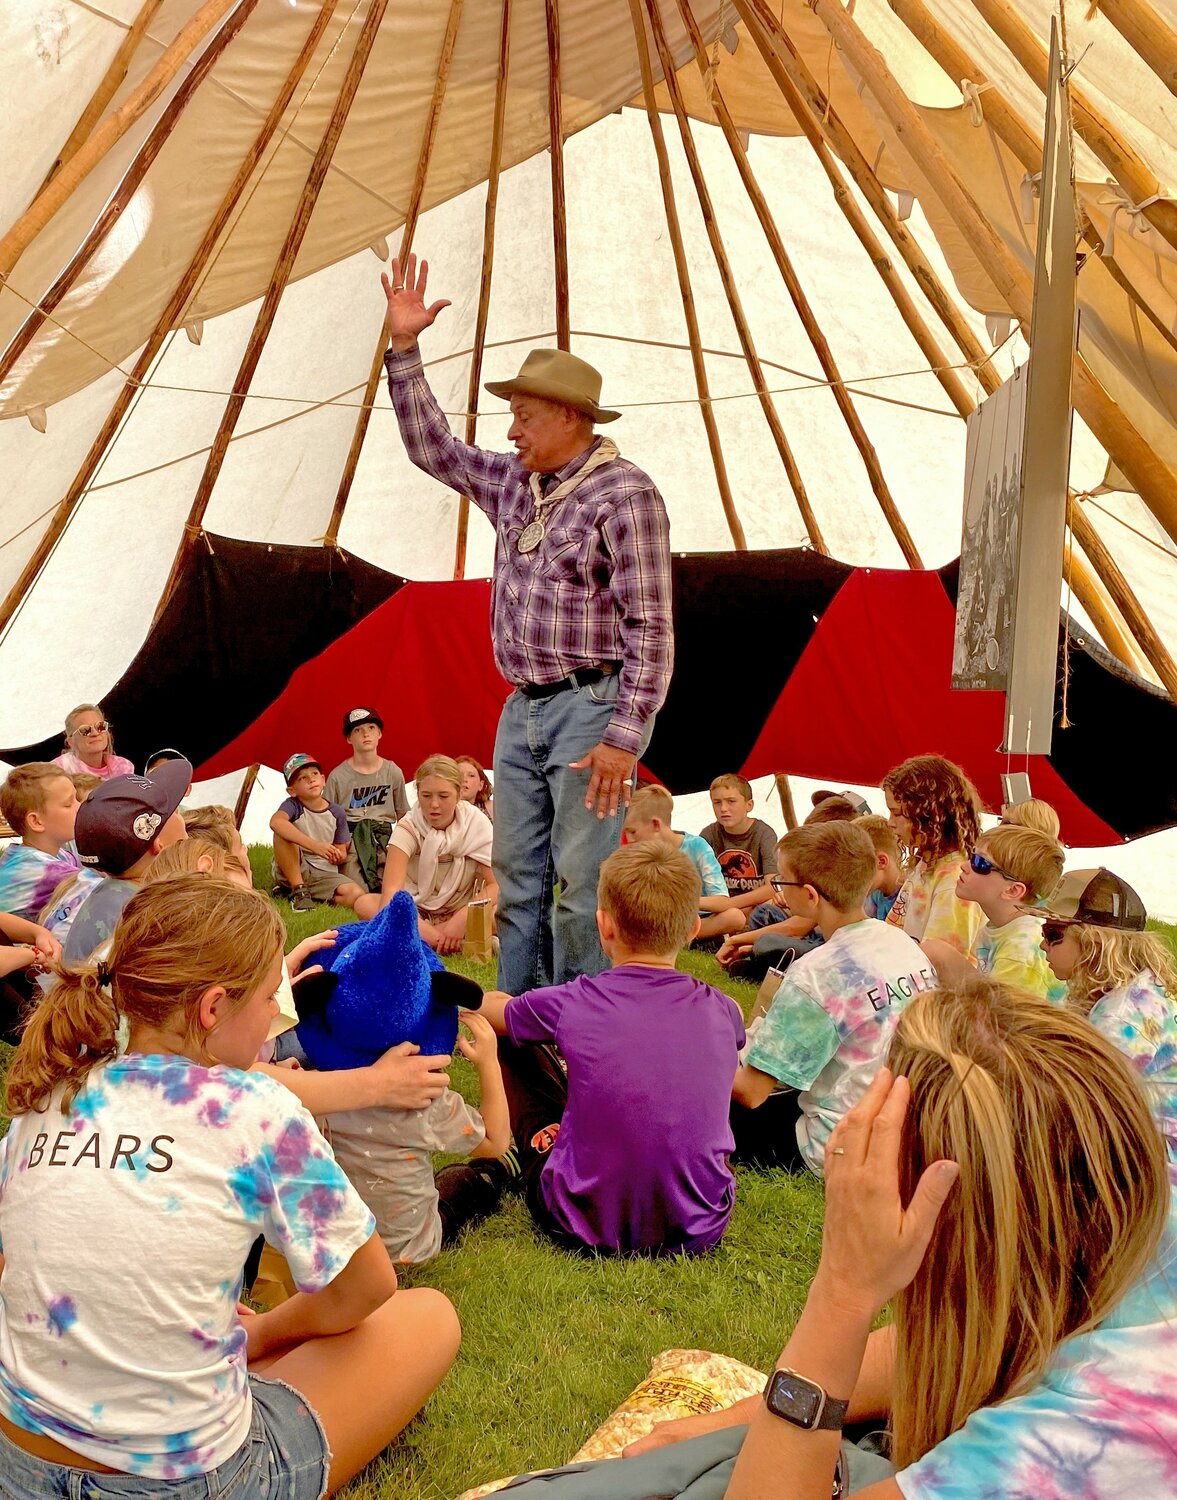 Roger Amerman of the Choctaw Nation presented a series of historical photographs that show the significance of the Native American long tent as the center of tribal community. In this photo, Amerman is discussing the East-West orientation of the long tent to a classroom from Roots Community School from Chelan. It was one of several learning stations students visited during the 30thannual Wenatchee River Salmon Festival Sept. 15-16.
By Rachel Hansen
Senior Communications Strategist, CC PUD